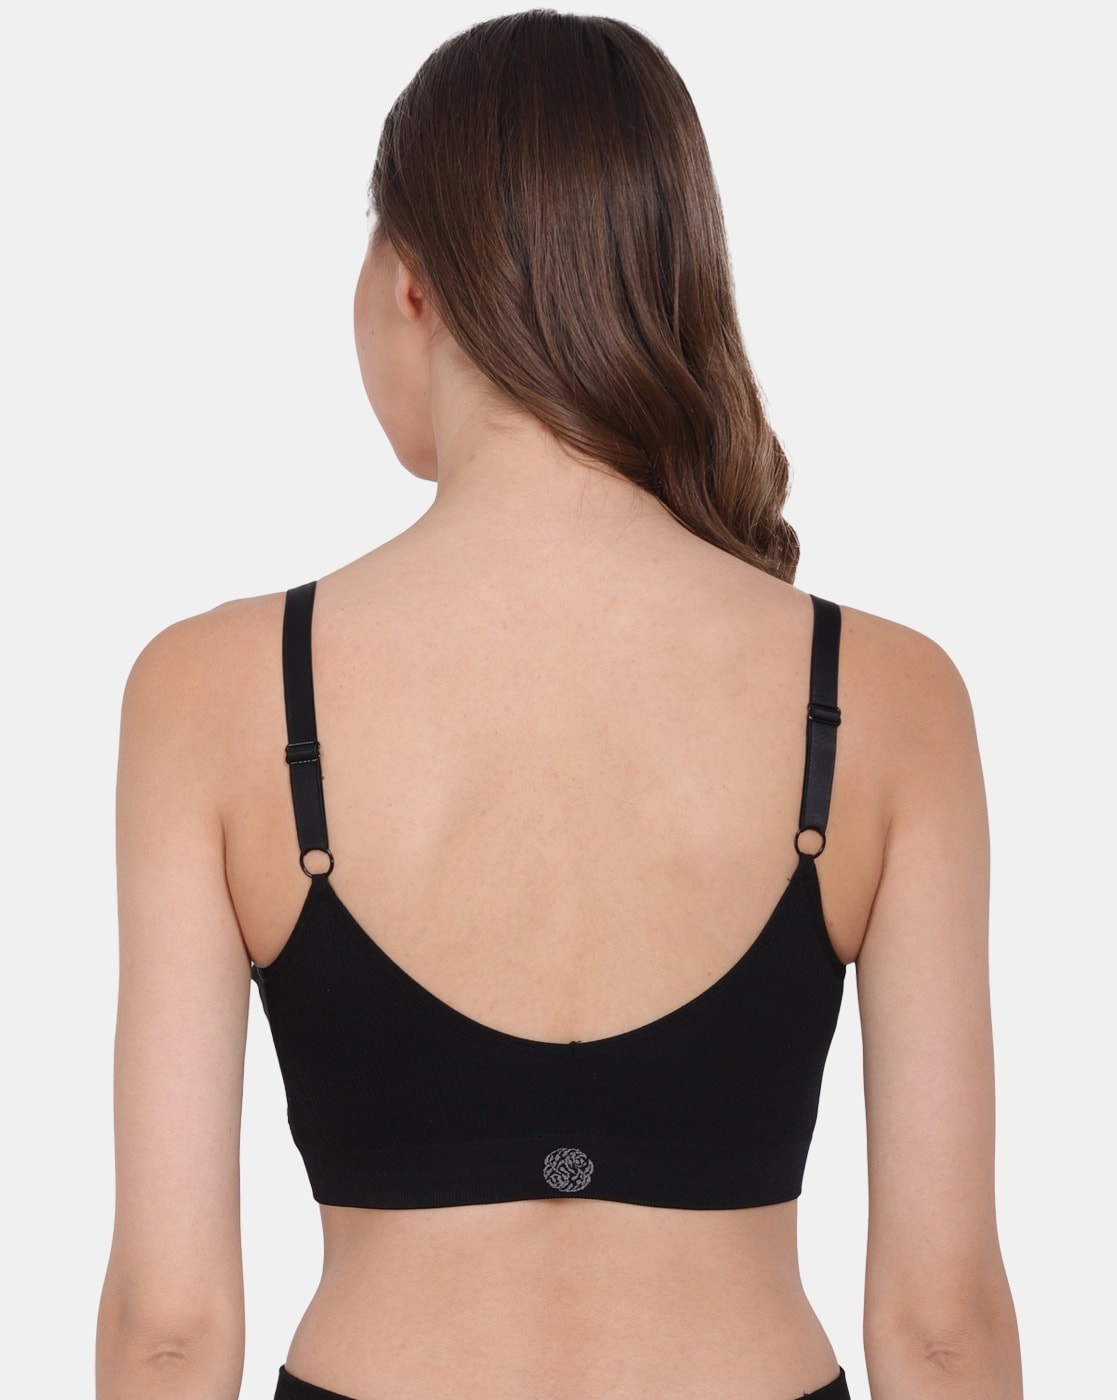 Apraa Black Sports Bra - Buy Apraa Black Sports Bra Online at Best Prices  in India on Snapdeal